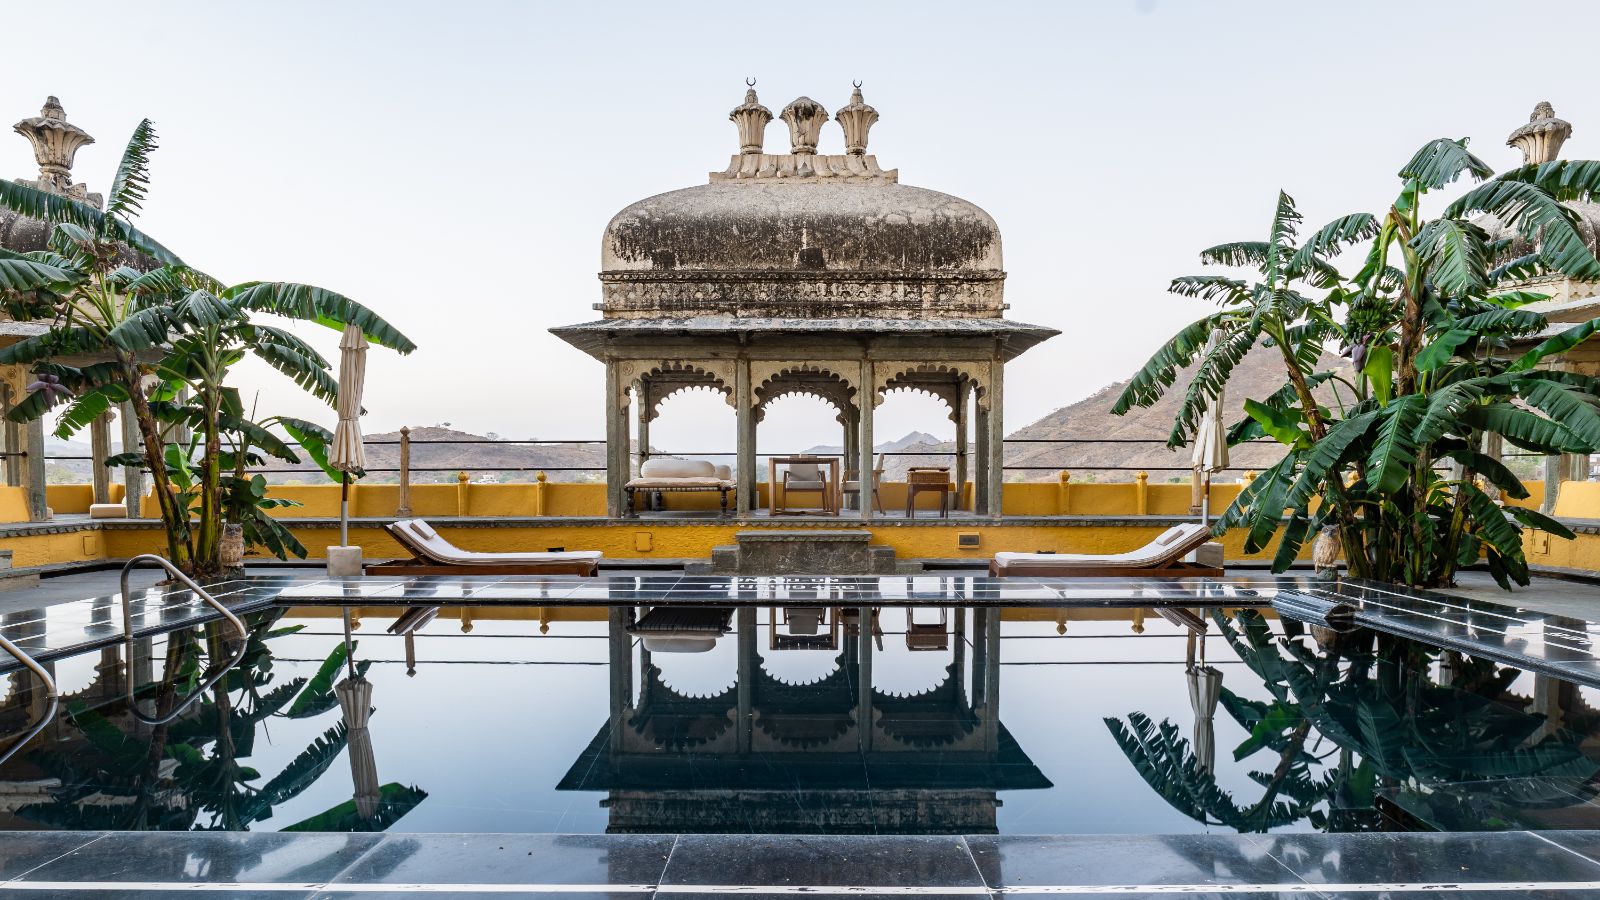 Private pool of a suite at the Raas Devigarh hotel near Udaipur India